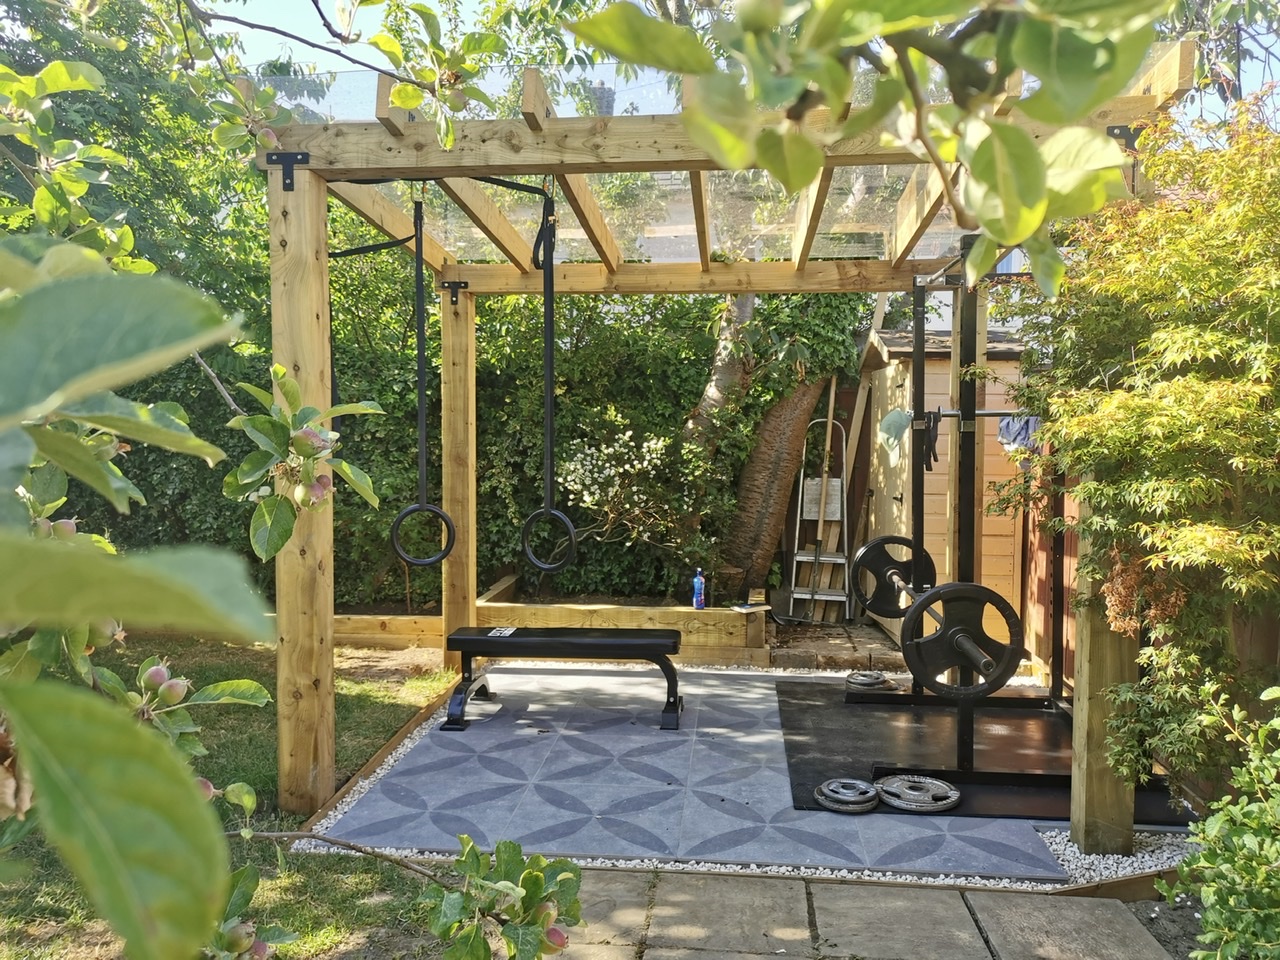 Outdoor garden gym with squat rack and gymnastic rings